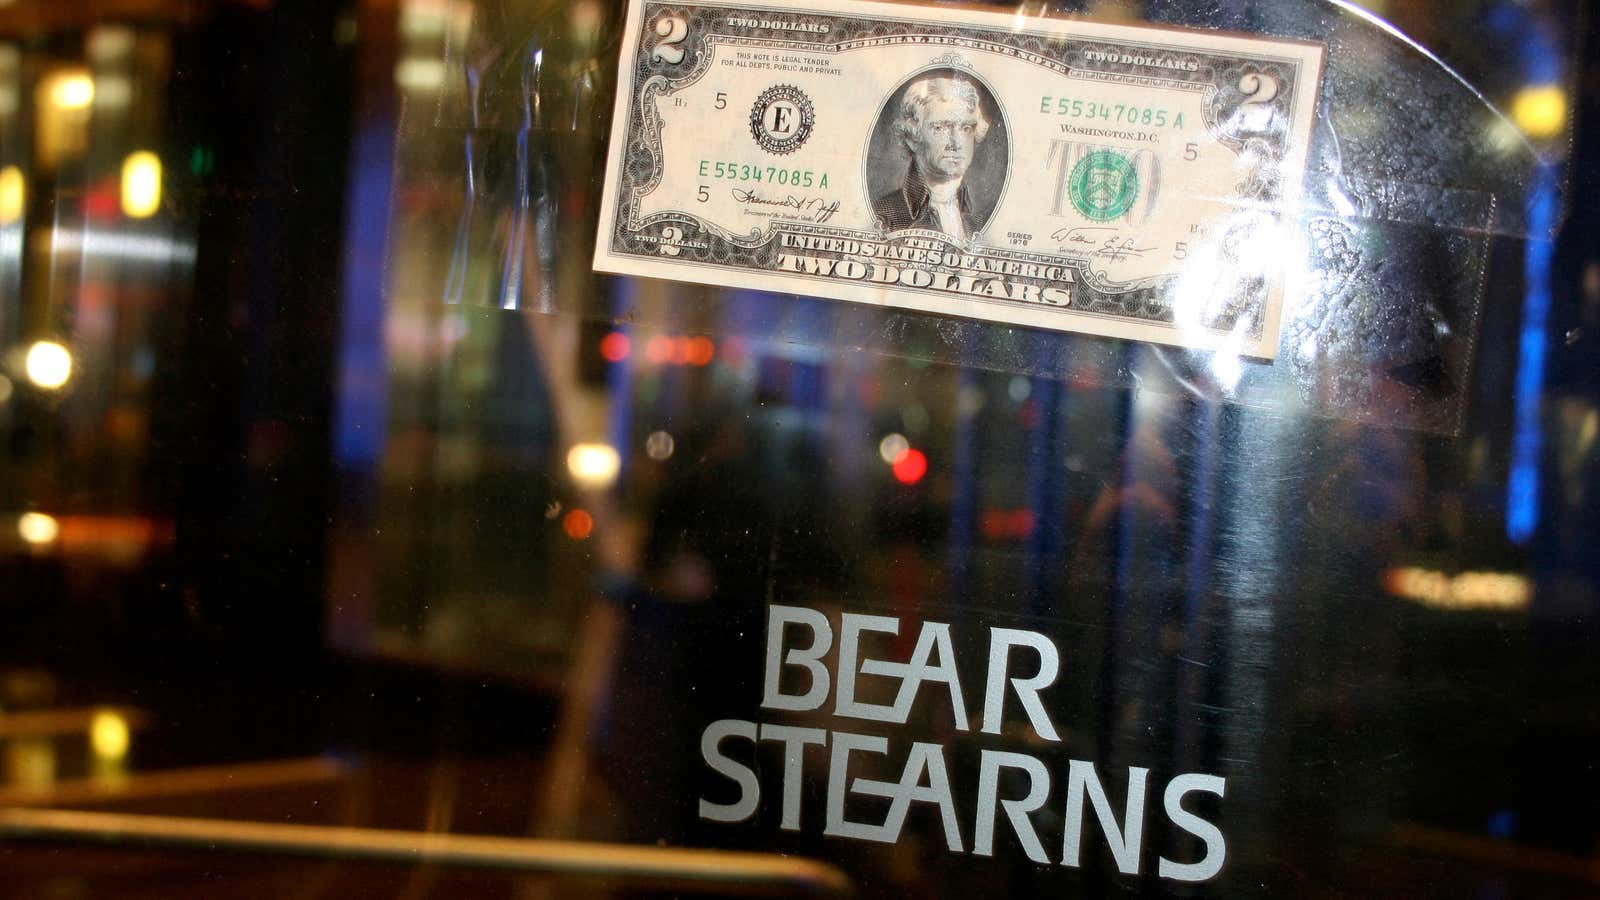 JP Morgan tried to buy Bear Stearns for $2 a share in 2008.